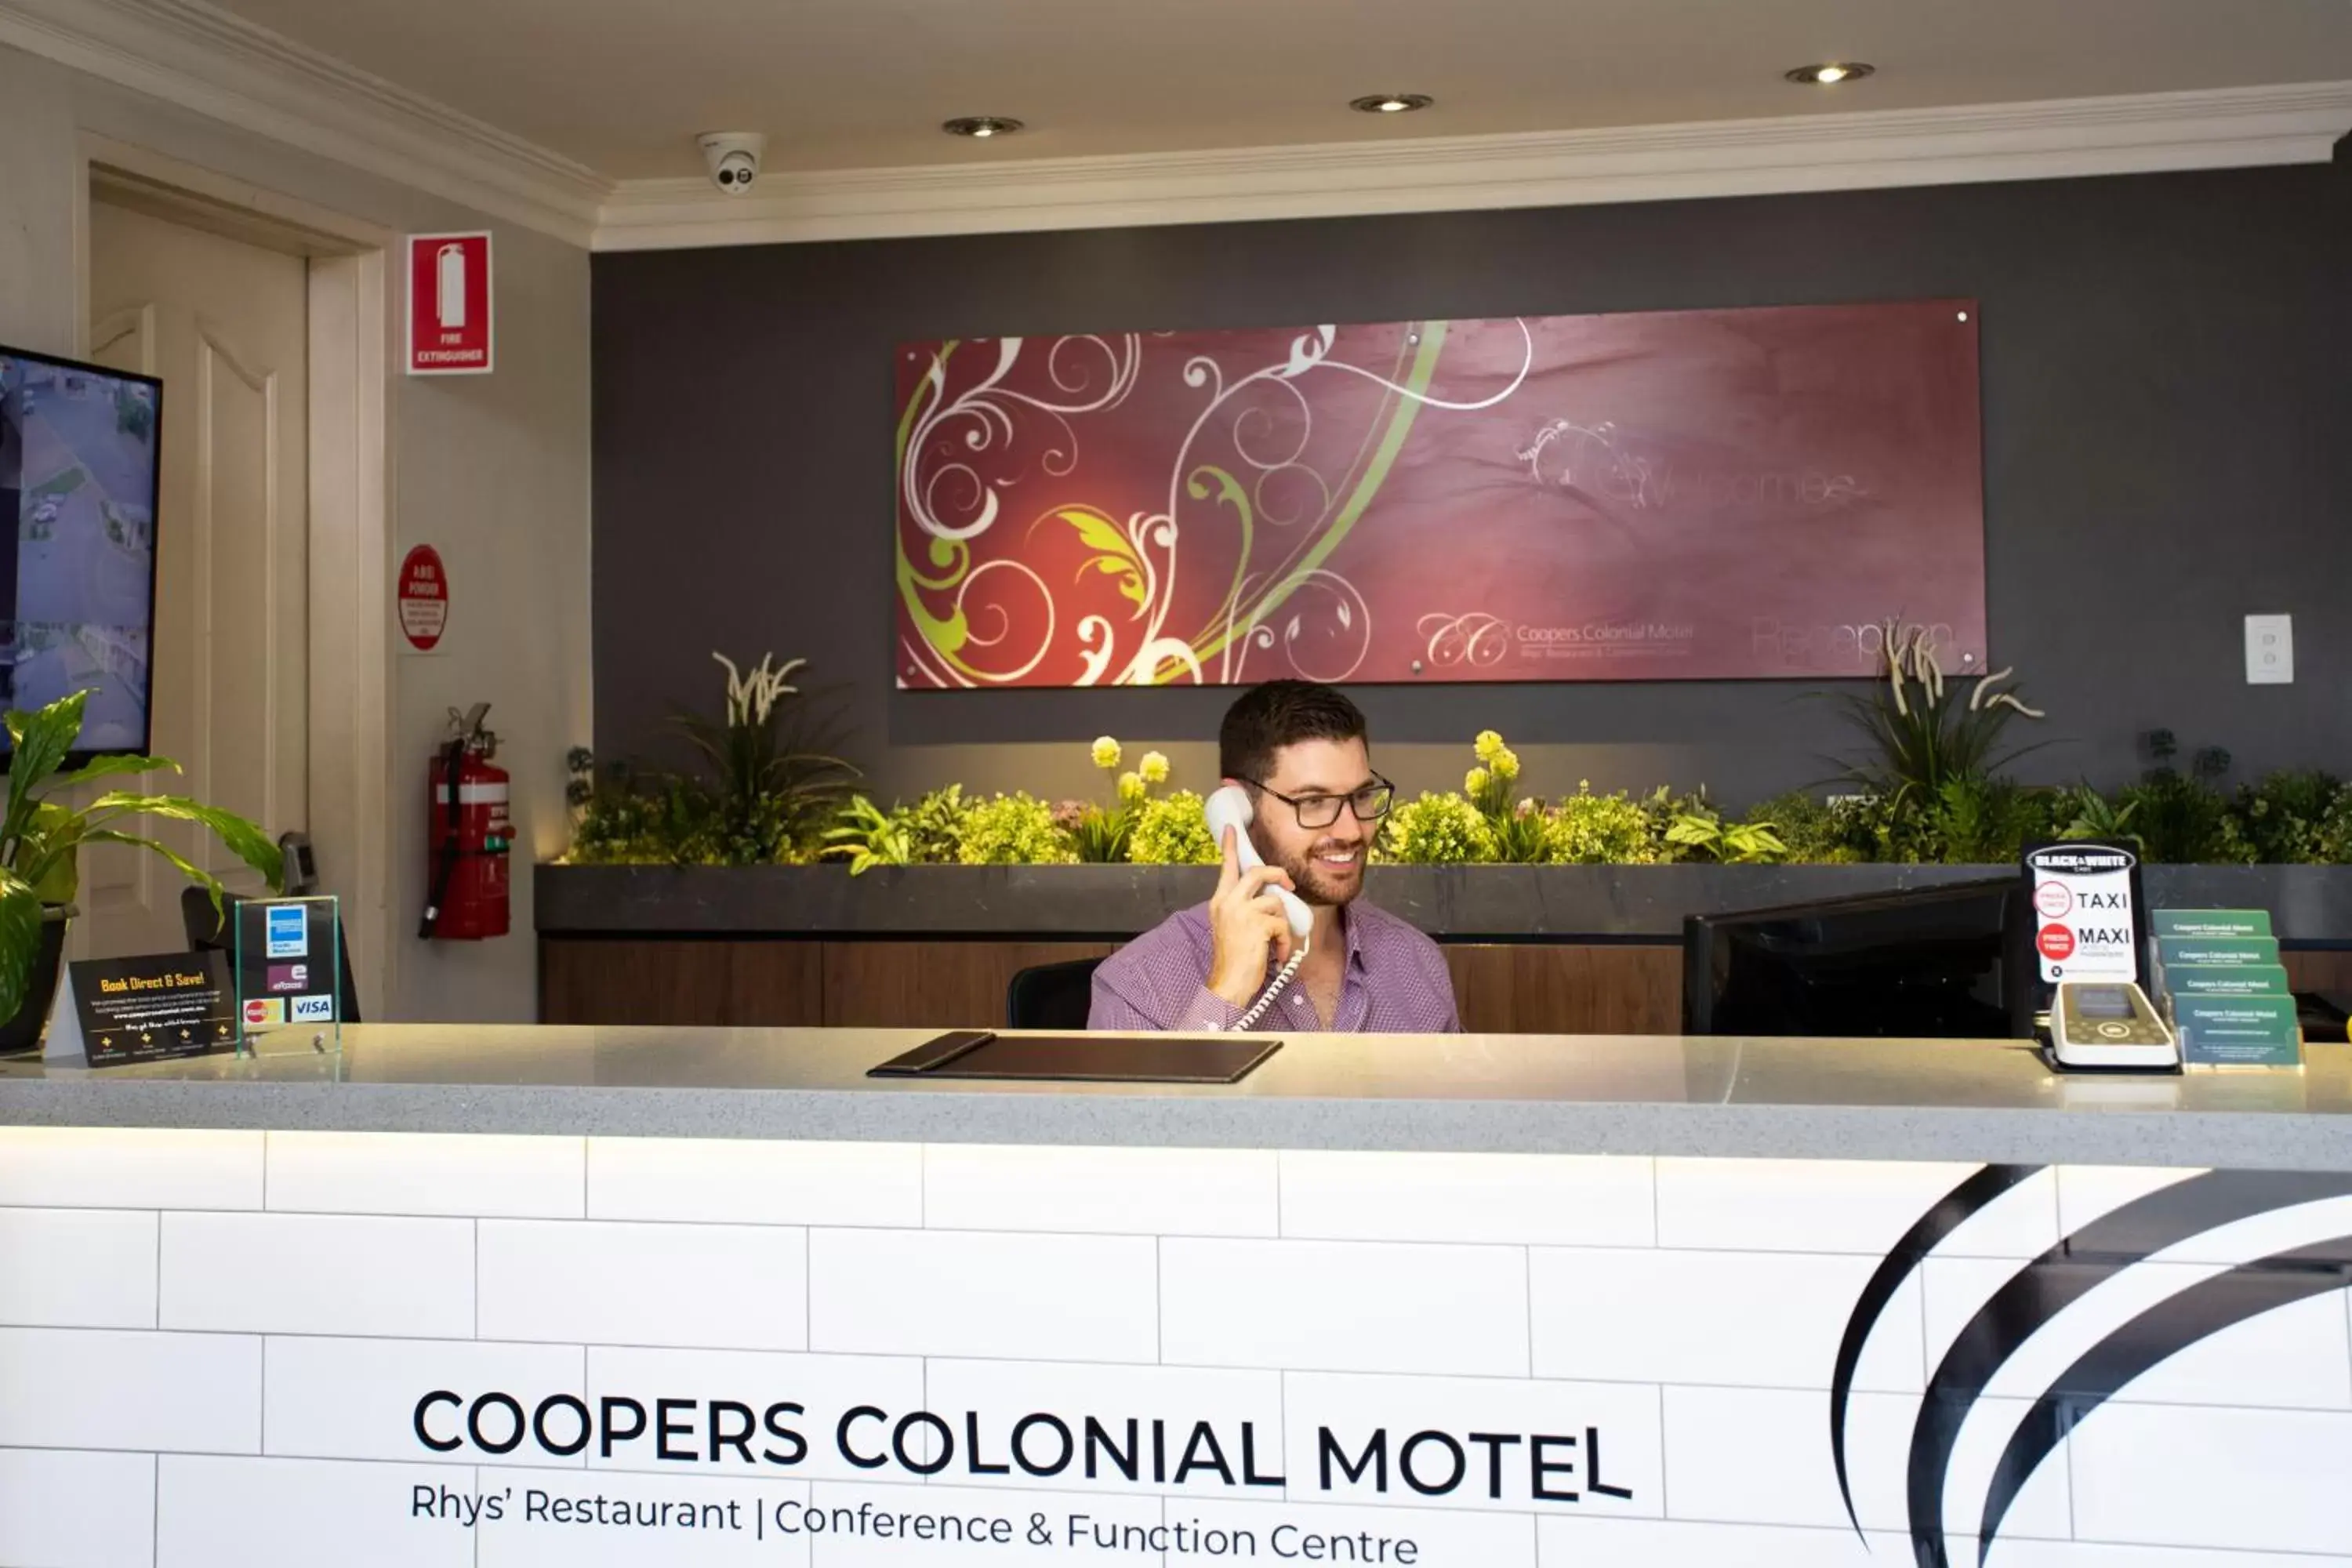 Staff in Coopers Colonial Motel